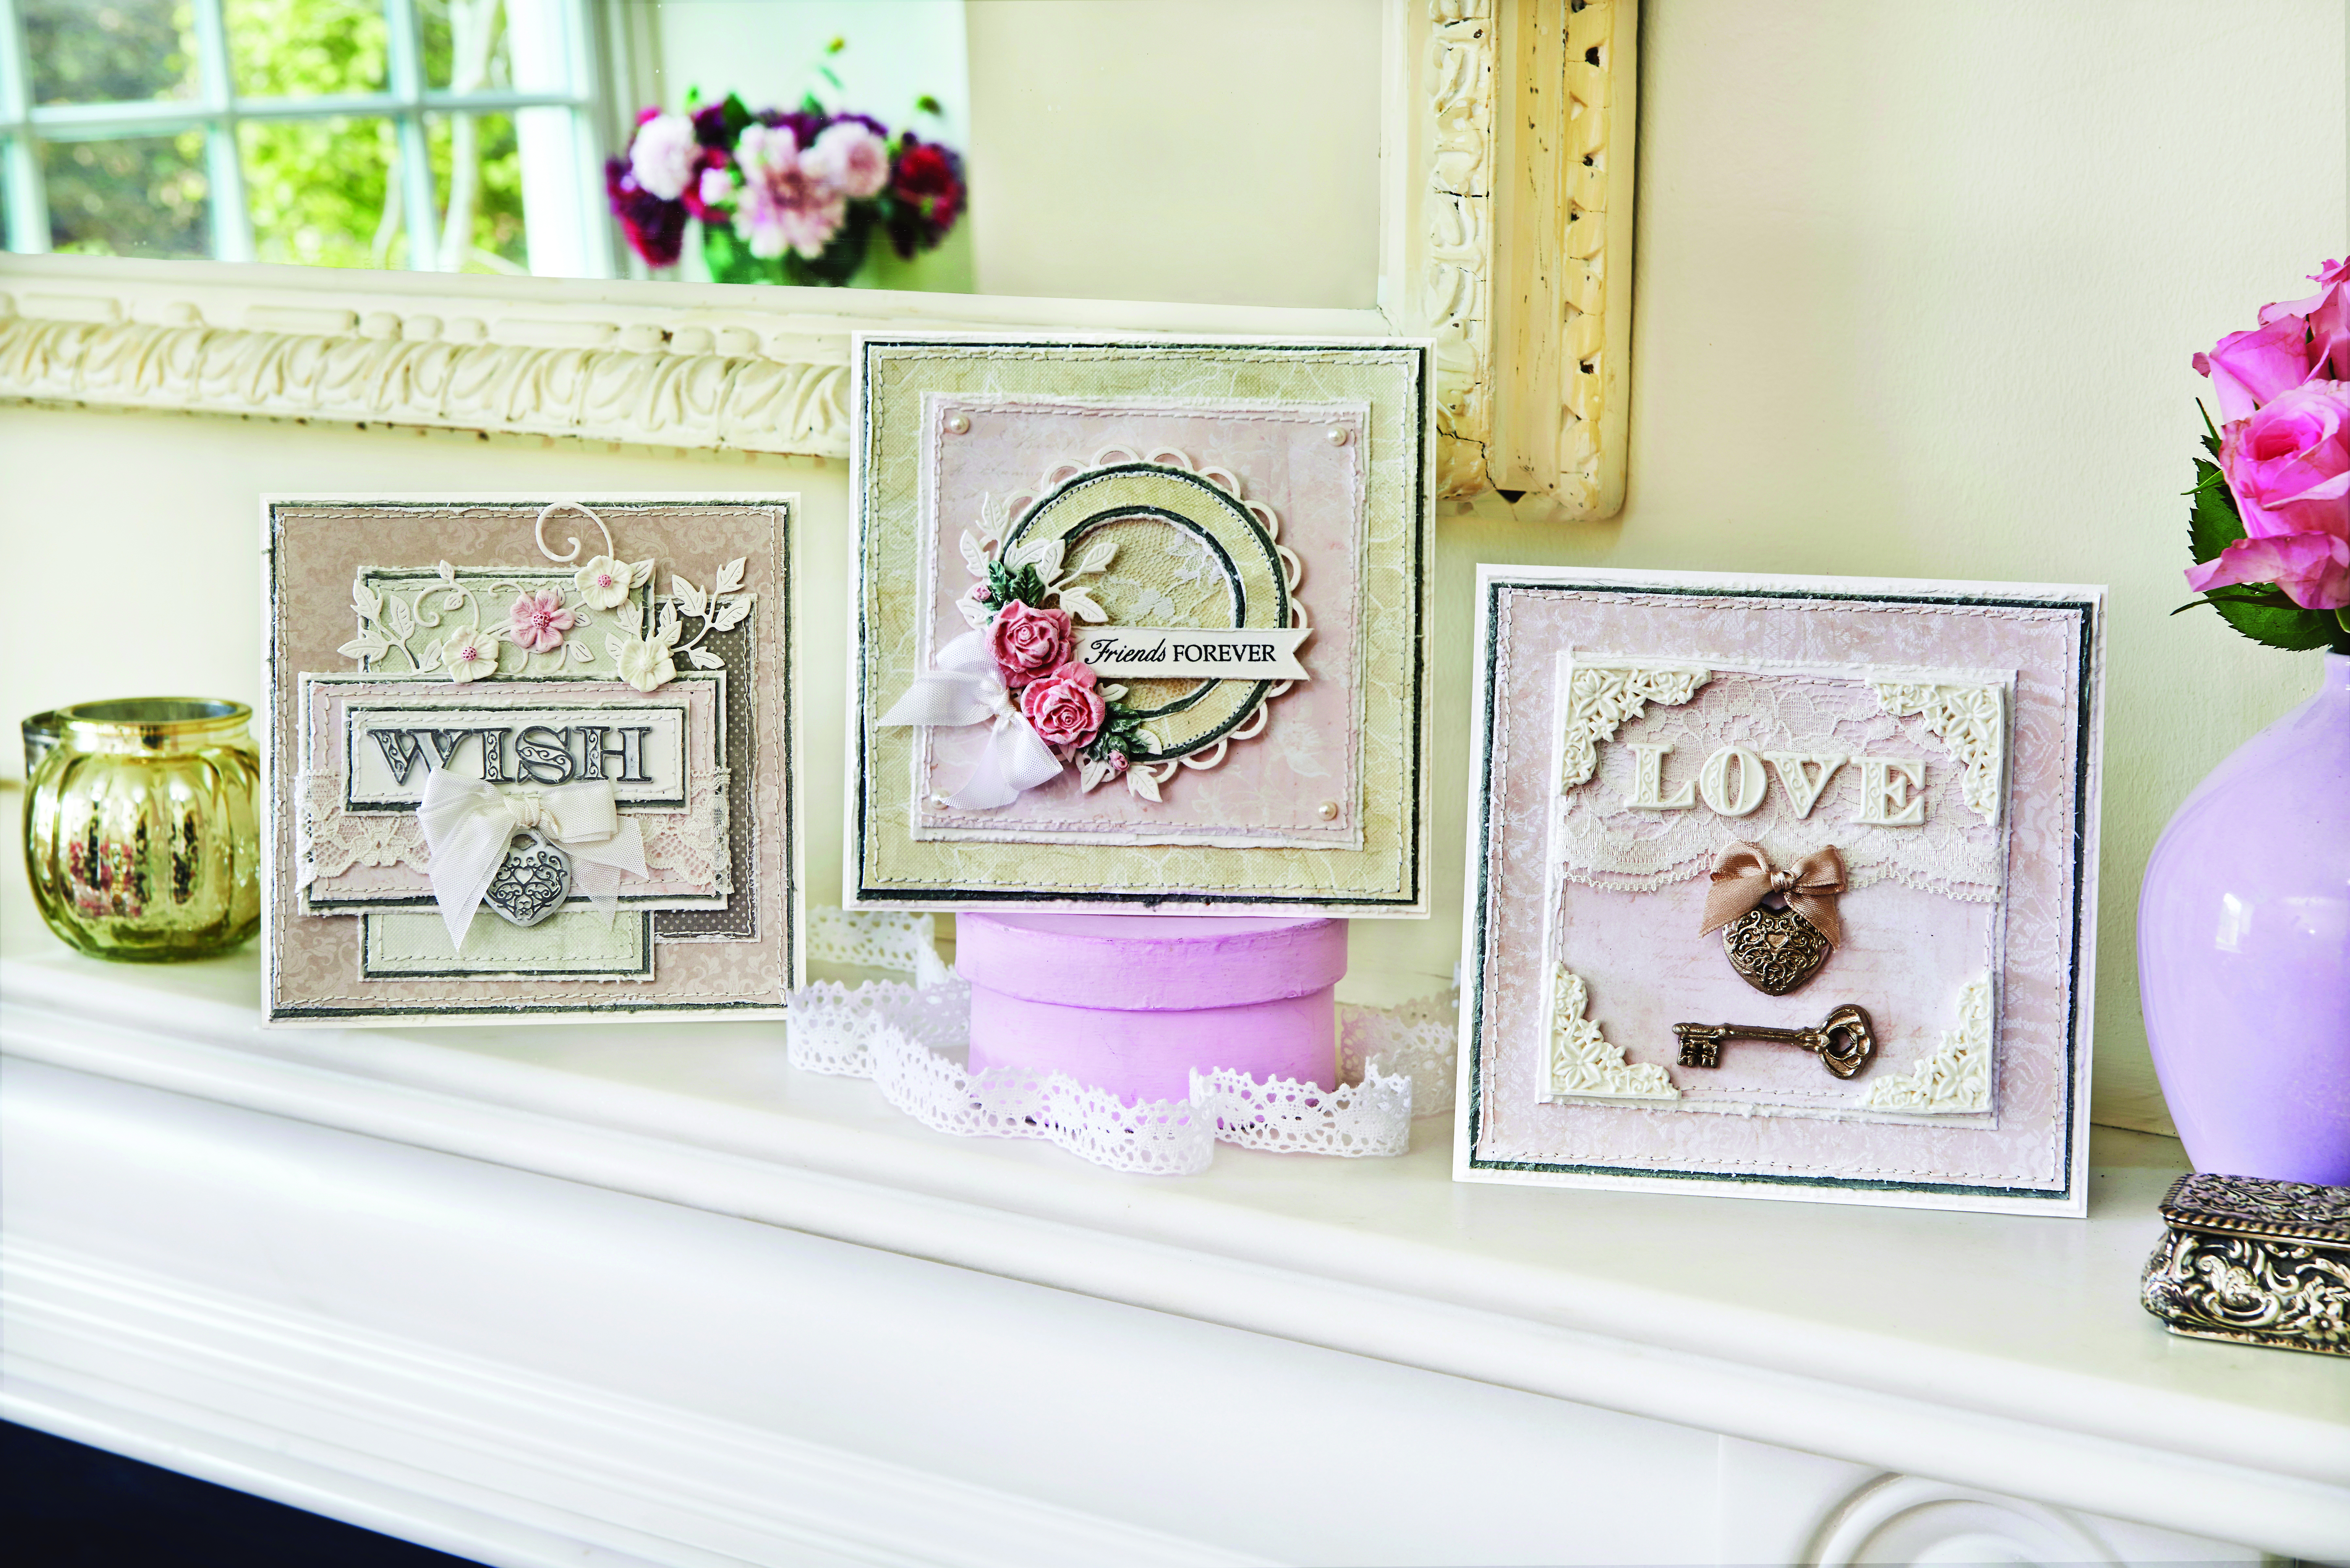 How to make air-dry clay embellishments – completed air-dry clay embellishments on cards